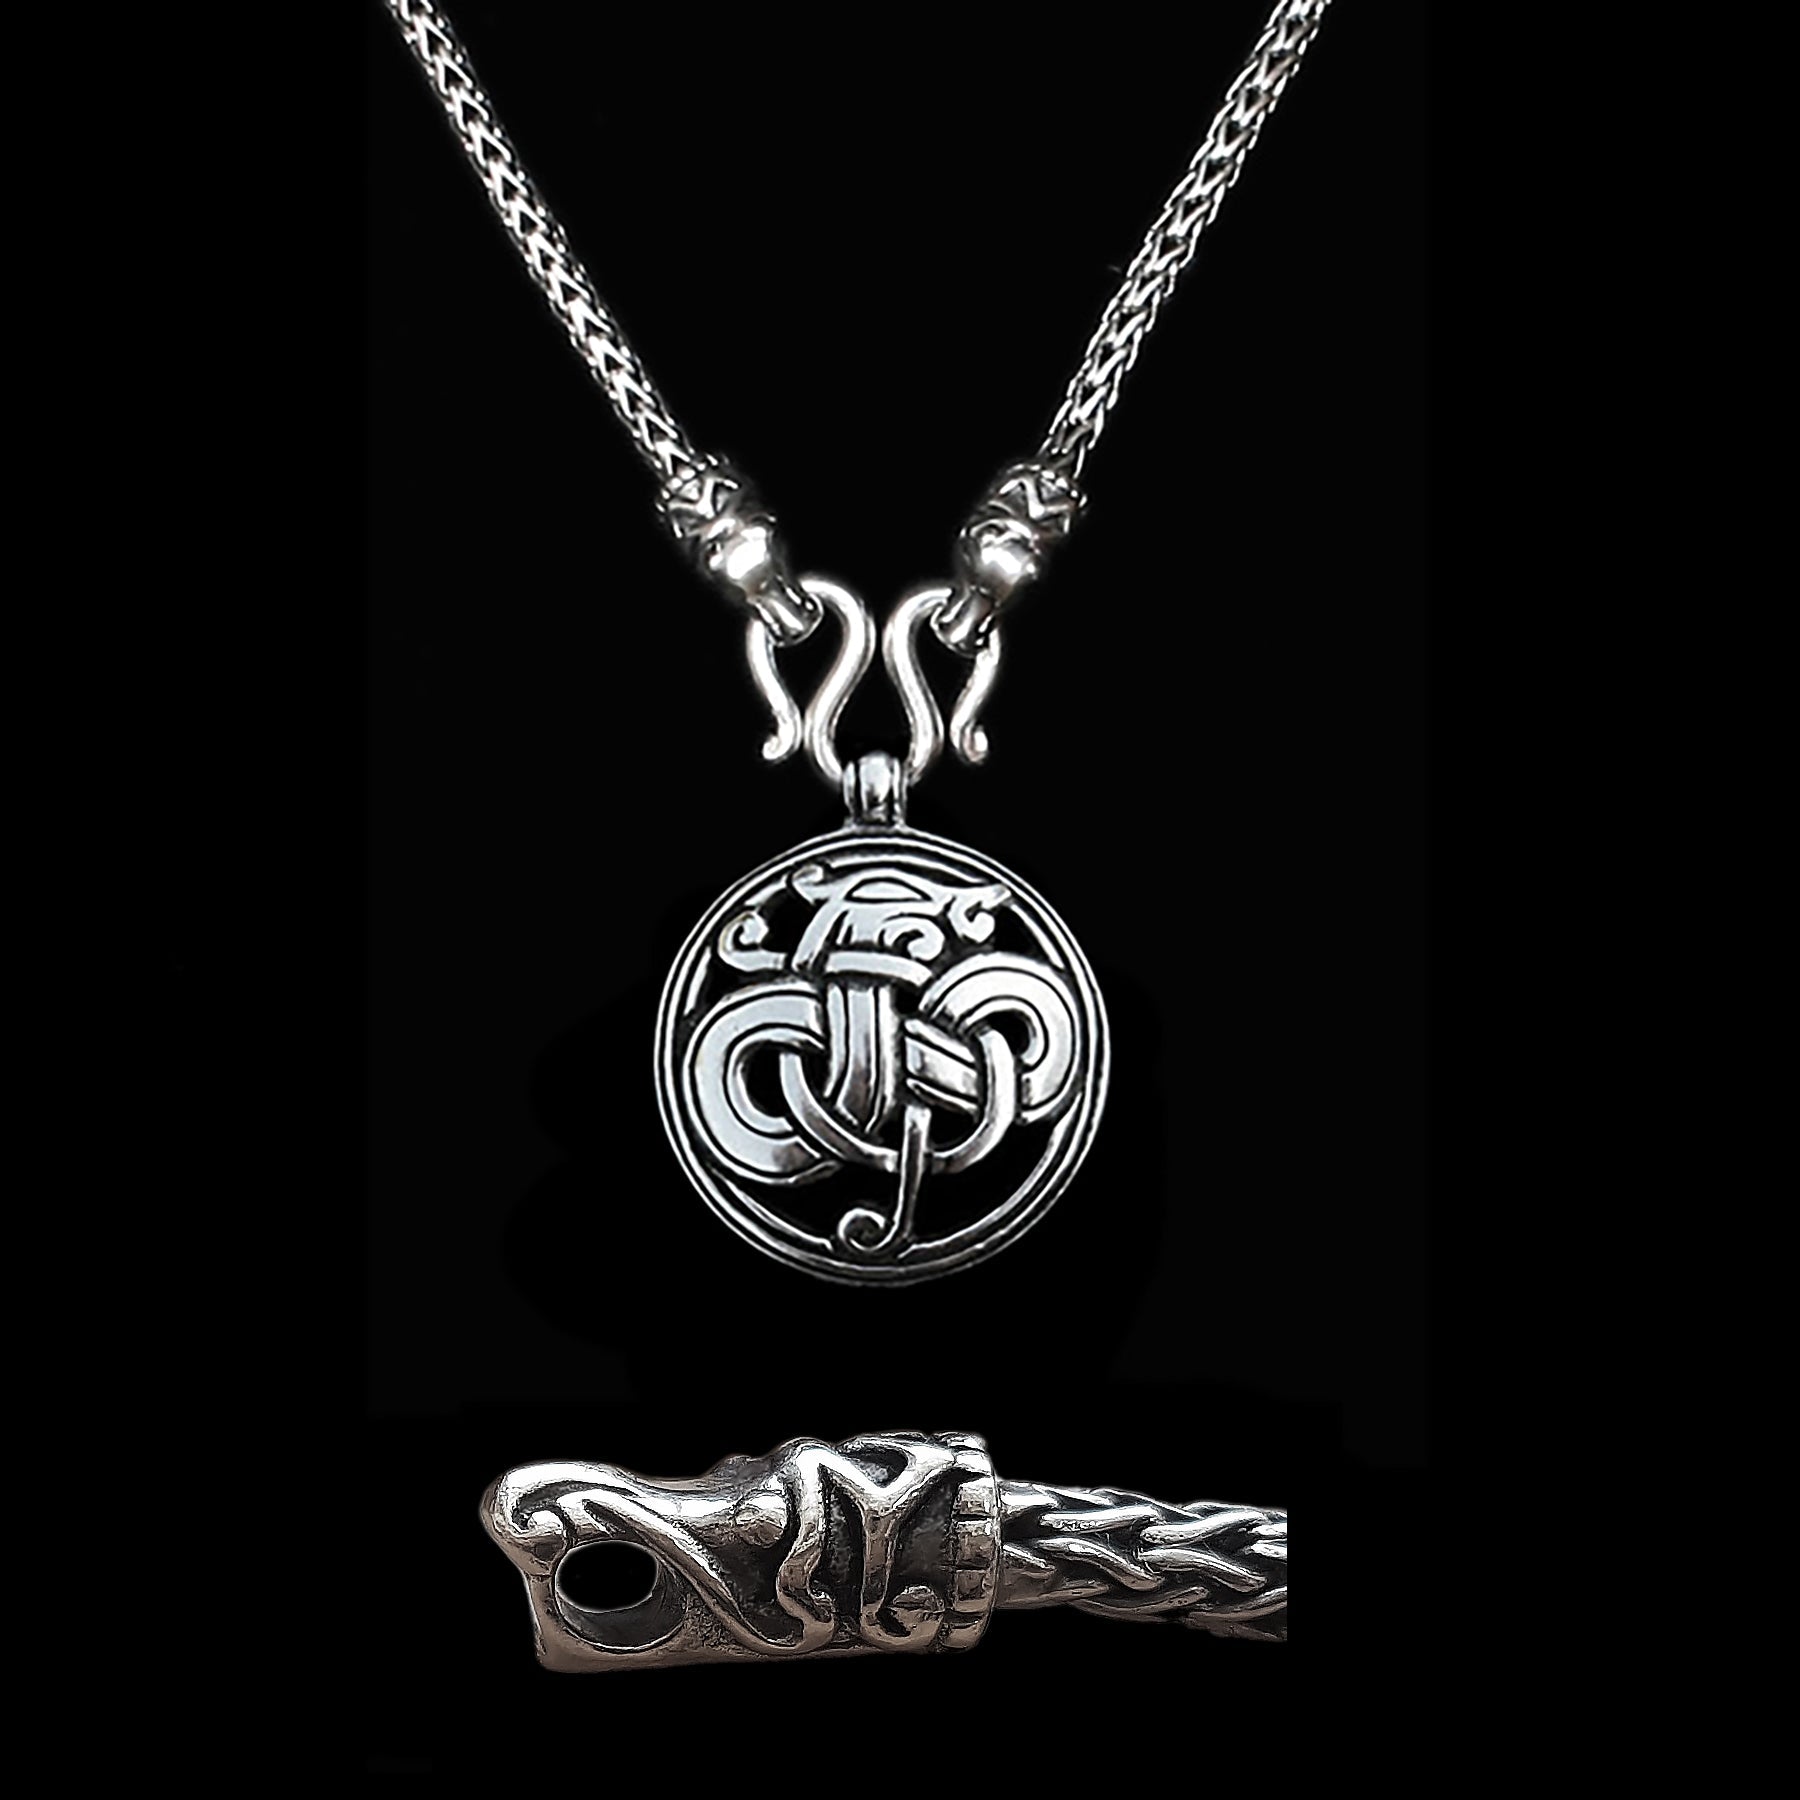 Sterling Silver Viking Snake Chain Necklace with Gotlandic Dragon Heads & Urnes Dragon Pendant